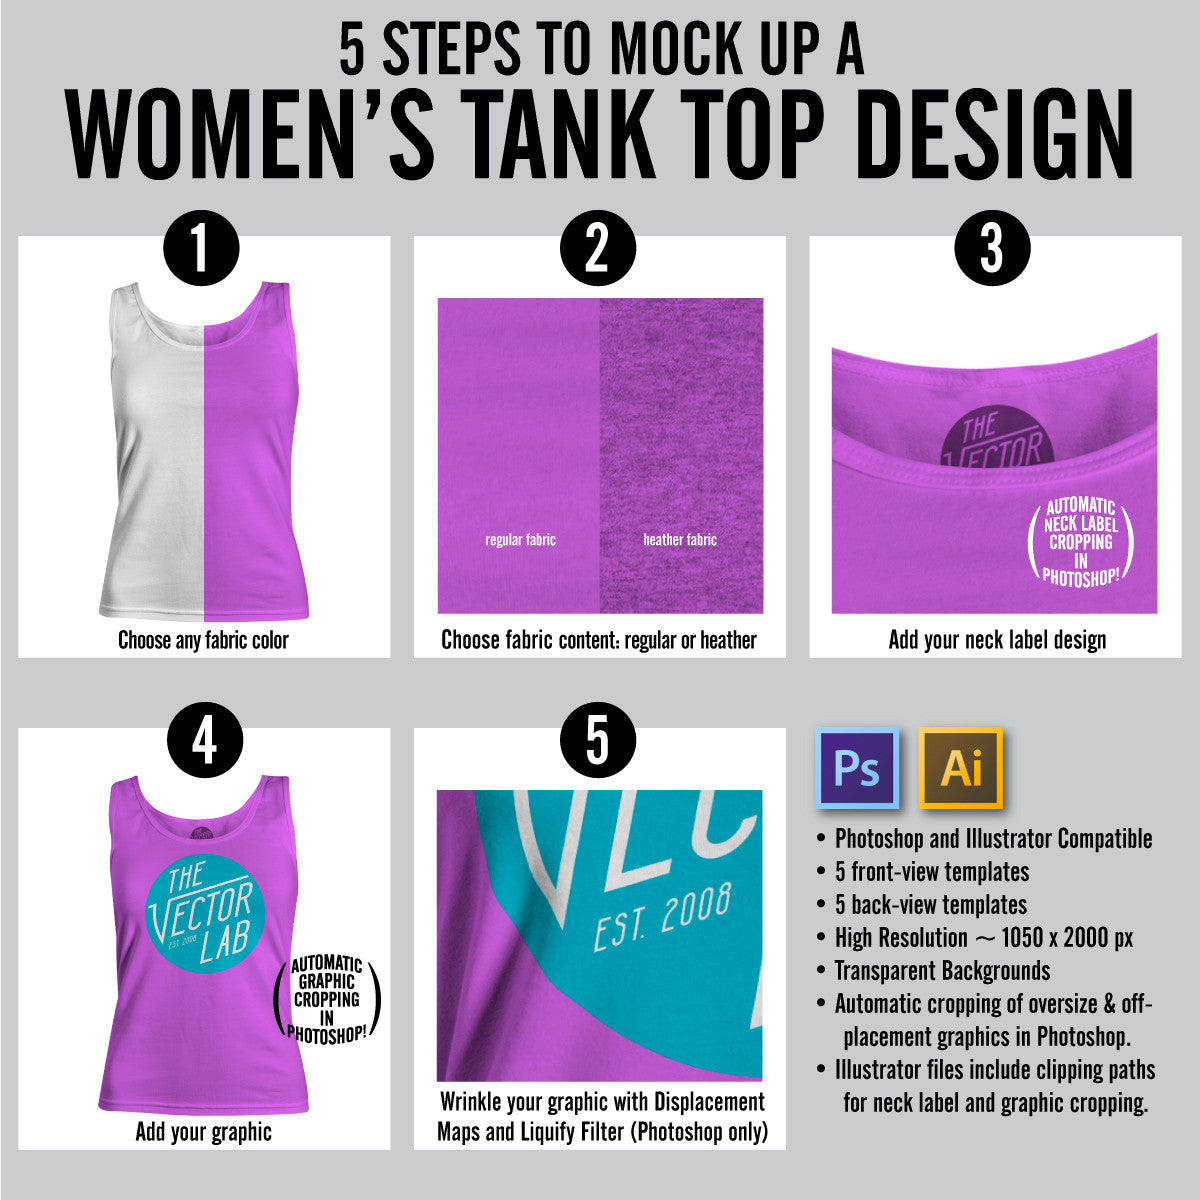 Download Women's Tank Top Mockup Templates - TheVectorLab